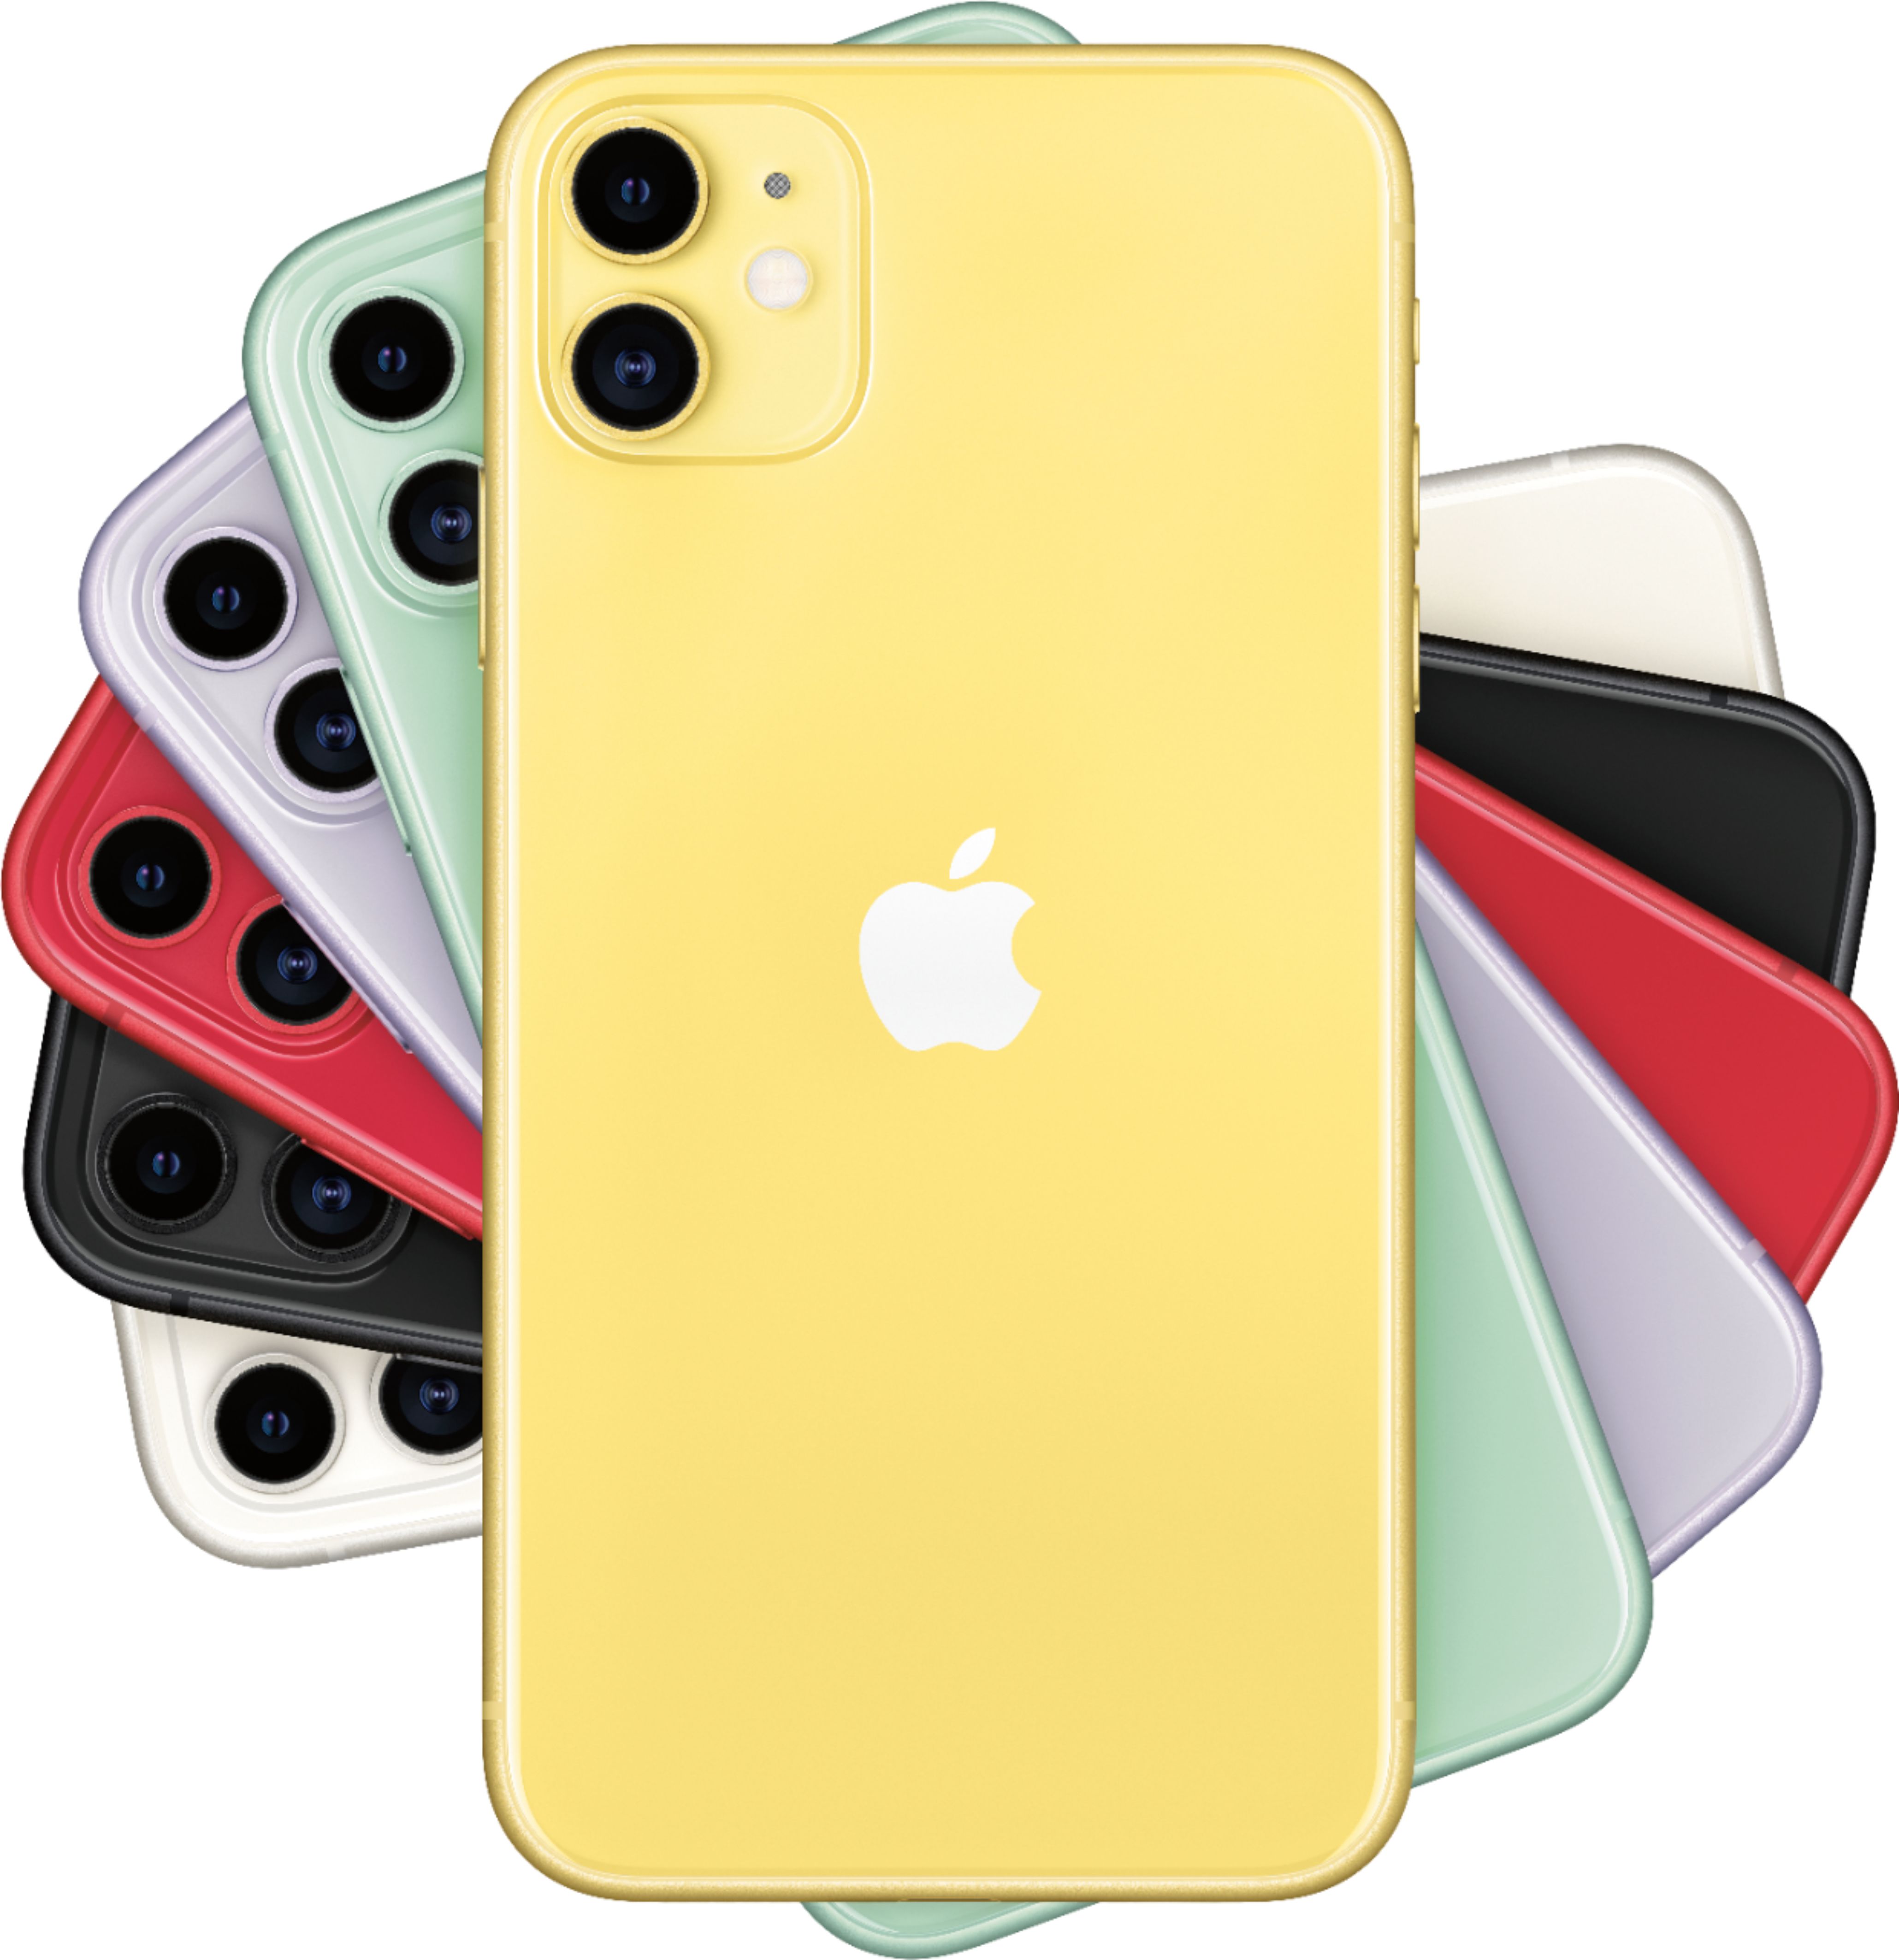 Apple iPhone  GB Yellow AT&T MWLH2LL/A   Best Buy